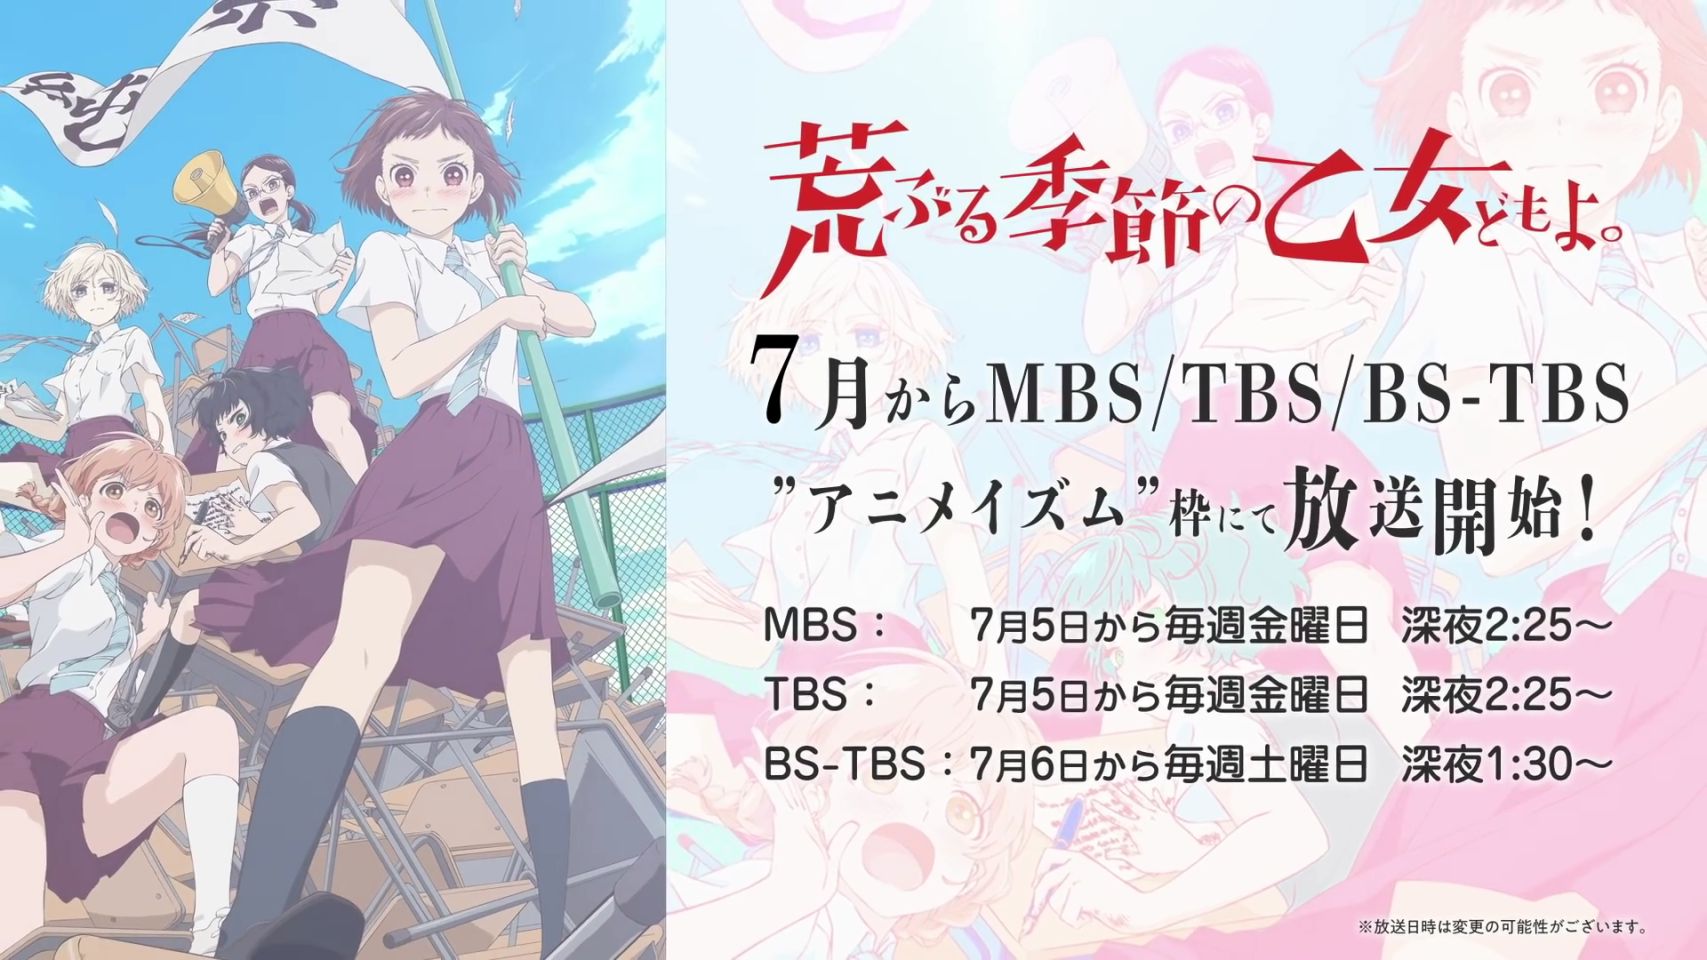 Anime "The Maidens of the Rough Season. A girl is talking about sex or something under Start broadcasting in July 18